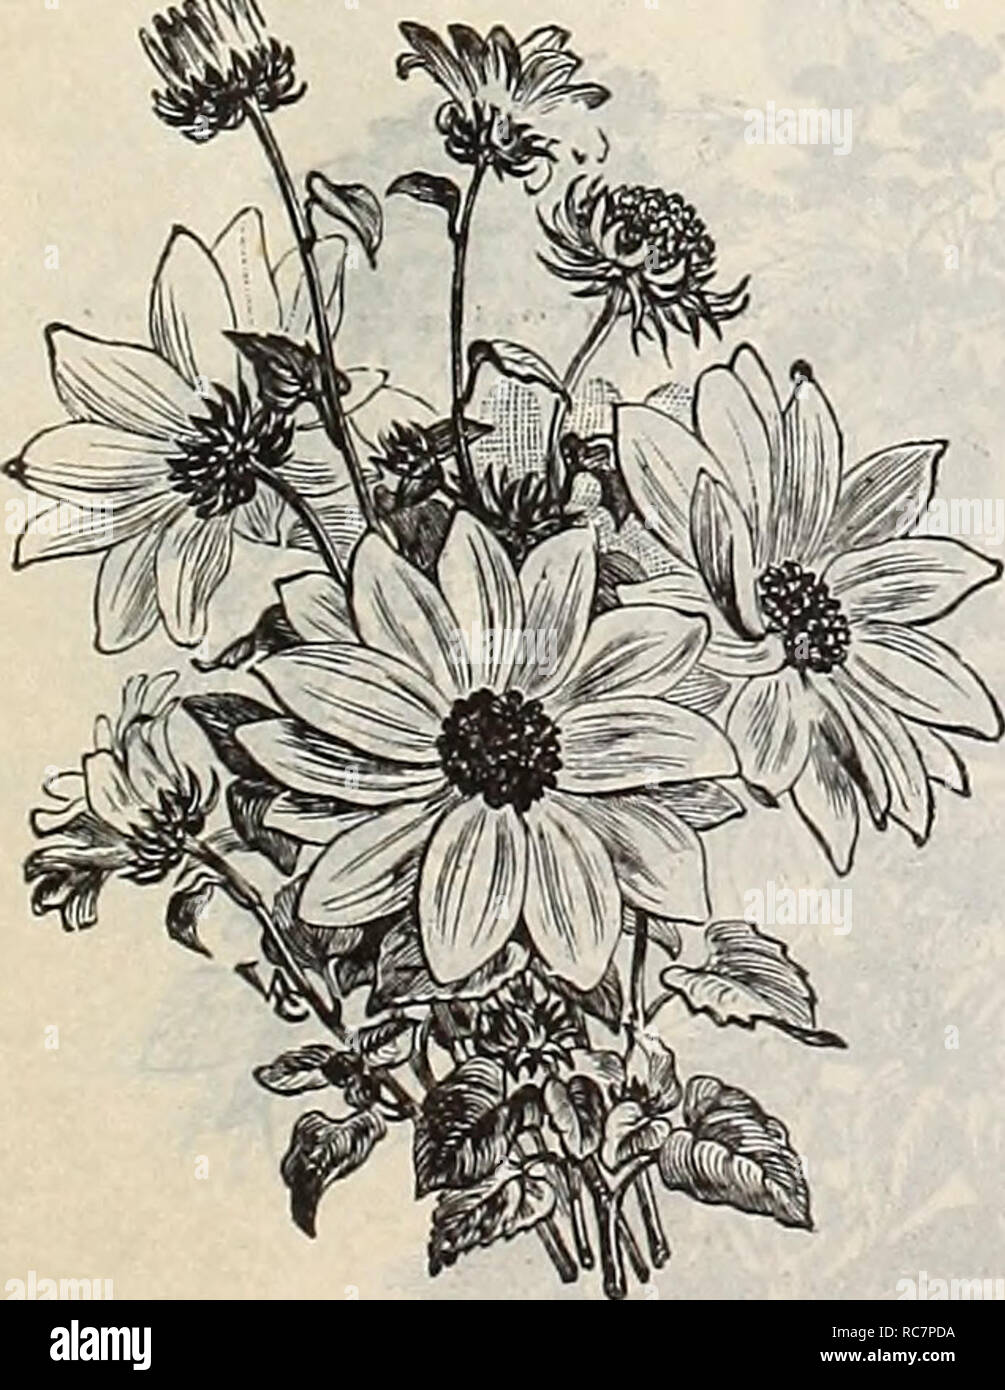 . Dreer's garden calendar : 1897. Seeds Catalogs; Nursery stock Catalogs; Gardening Equipment and supplies Catalogs; Flowers Seeds Catalogs; Vegetables Seeds Catalogs; Fruit Seeds Catalogs. %^? Helianthus or Sunflower. eHÂ£;-';Â«i?JÂ«3Rk&gt;, Remarkable for the stately growth, size and brilliancy of their flowers, making a very good effect among shrubbery and for screens. Hardy annuals. perpkt 5920 Helianthus Nanus Fl. PI. (Globe of Gold). Dwarf double- orange flowers; 4 feet. Per oz., 30 cts 5 5922 âNanus Variegatis. Bushy, pyramidal-shaped plants; varie- gated leaves; 4 feet 5 5921 âGlobosus Stock Photo